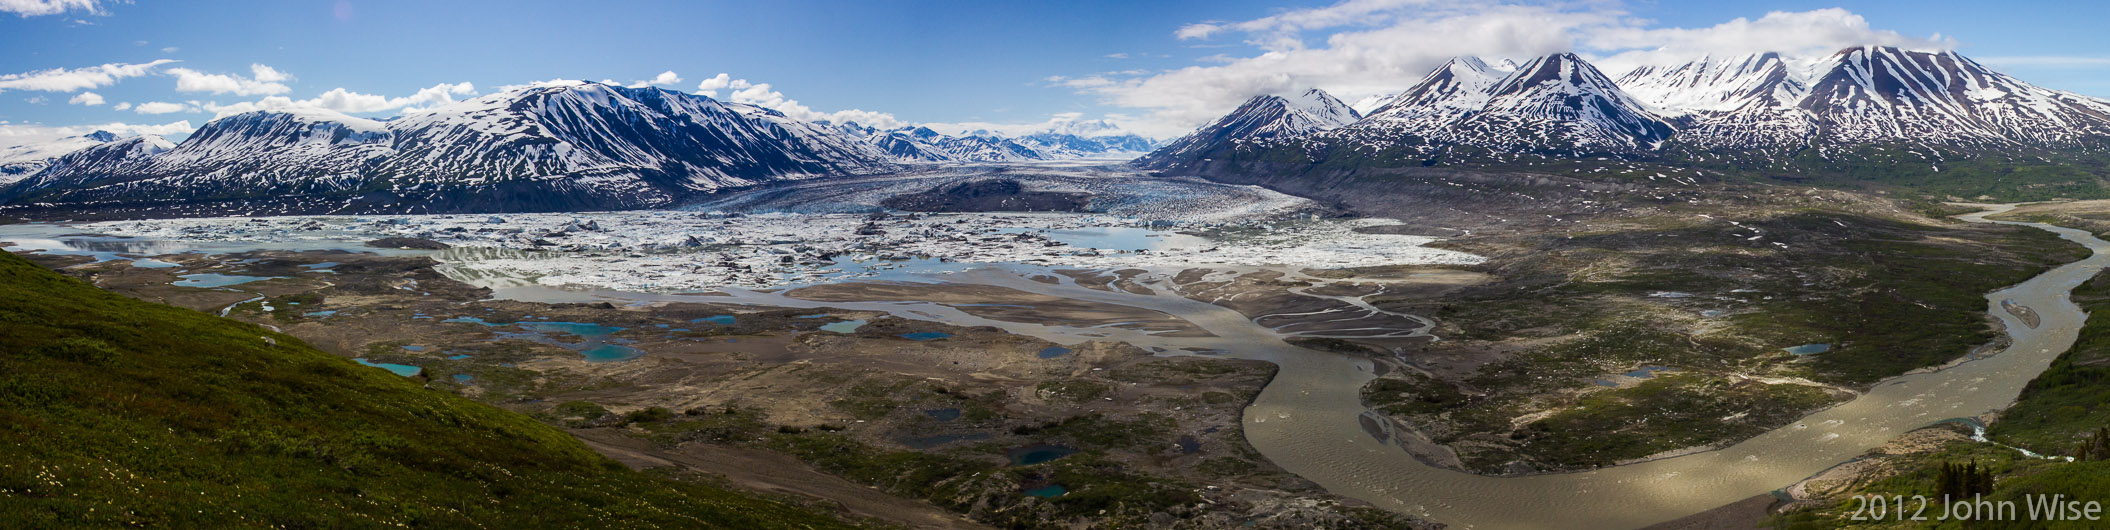 The view of Lowell Glacier and its lake from Goatherd Mountain in Kluane National Park Yukon, Canada